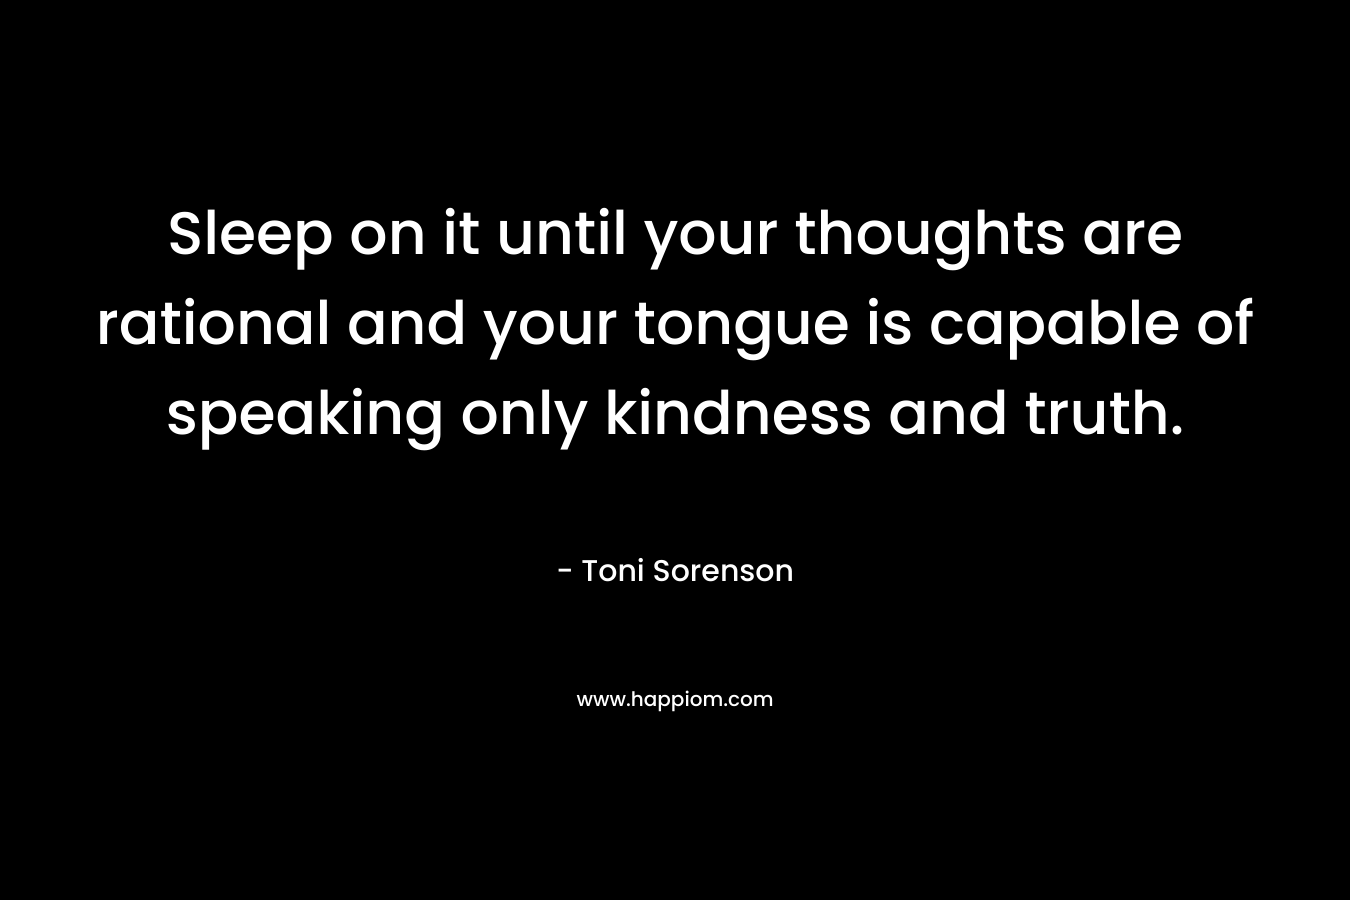 Sleep on it until your thoughts are rational and your tongue is capable of speaking only kindness and truth. – Toni Sorenson